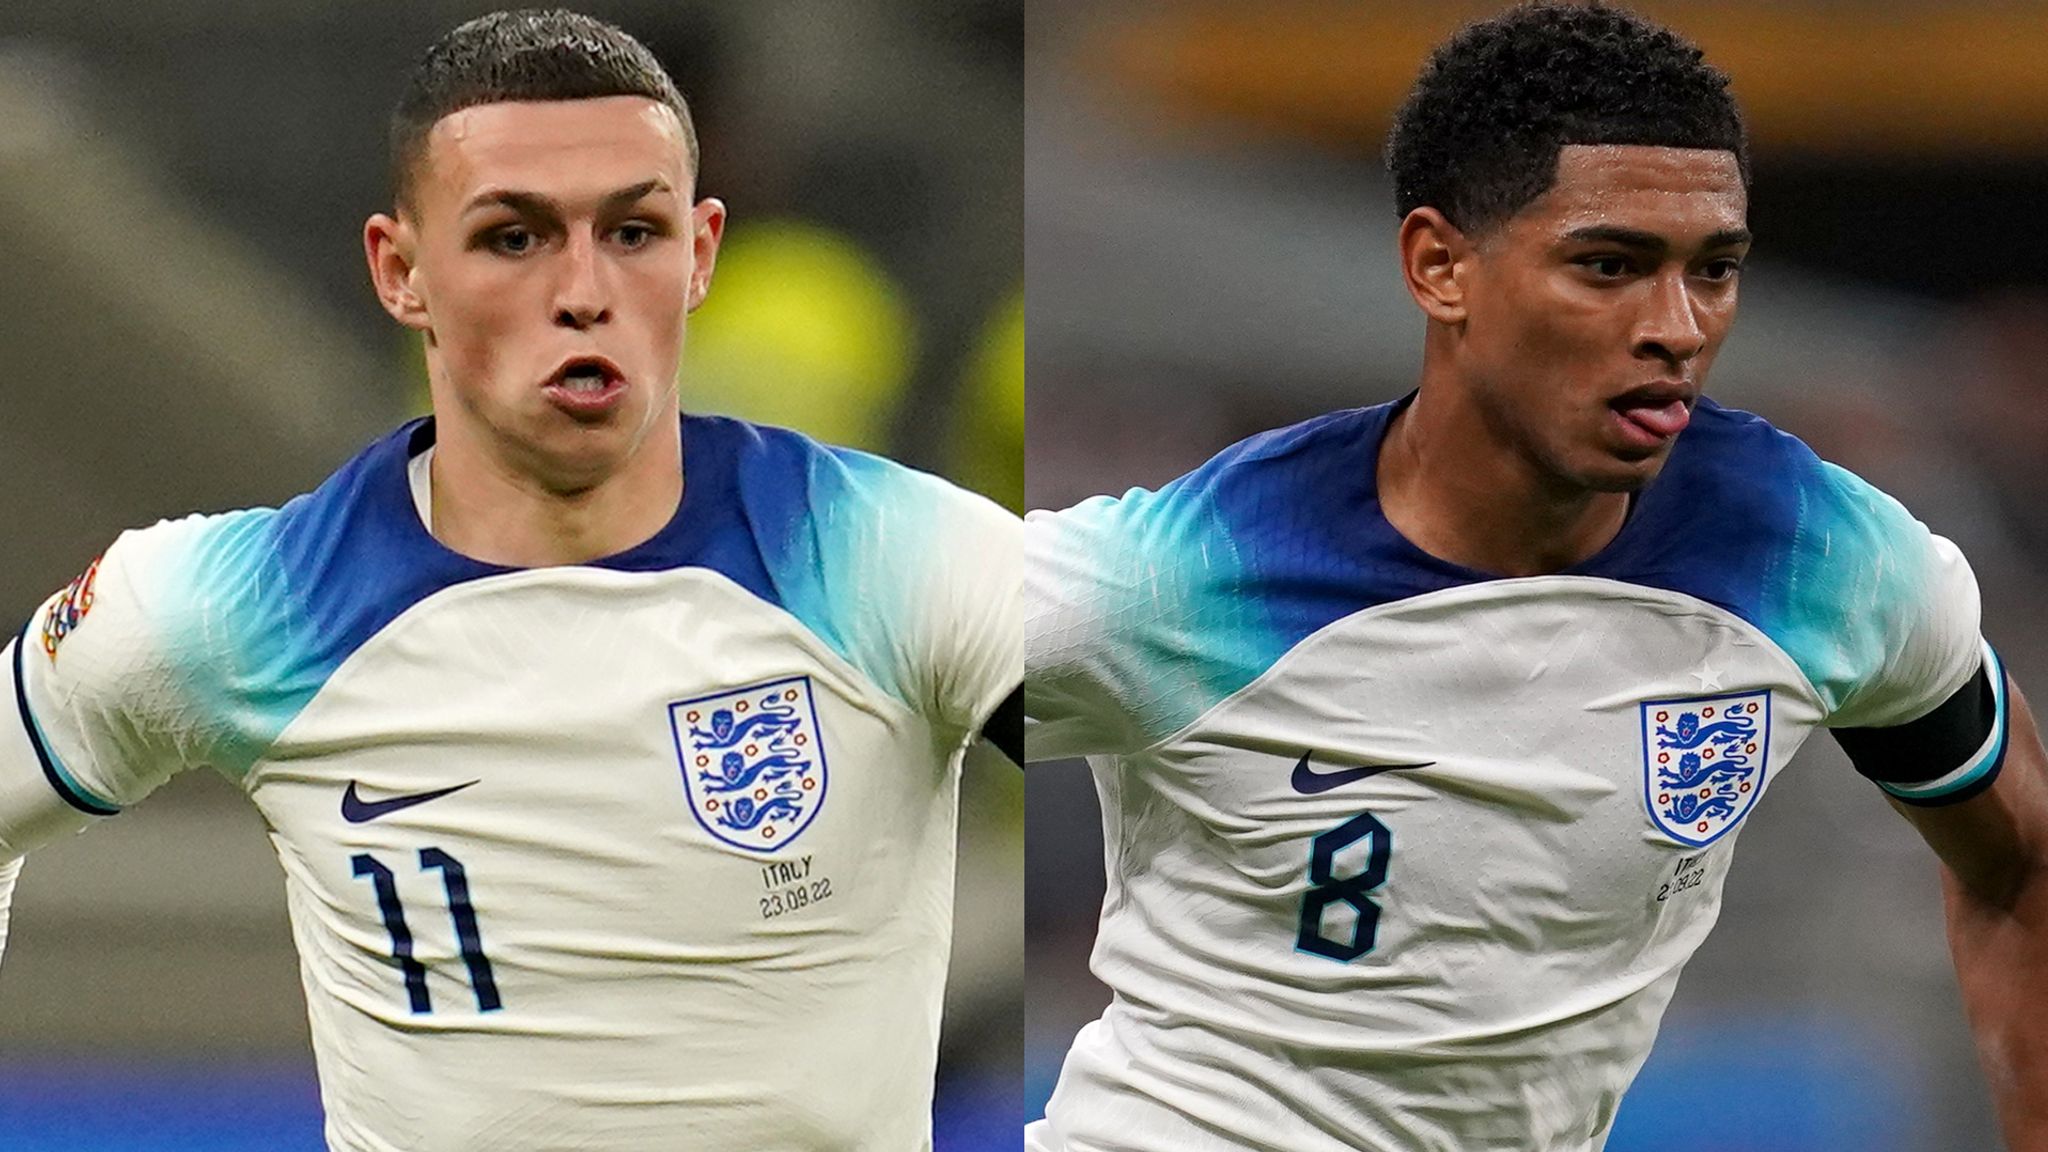  On the left, Phil Foden is playing soccer for England. On the right, Jude Bellingham is playing soccer for England.